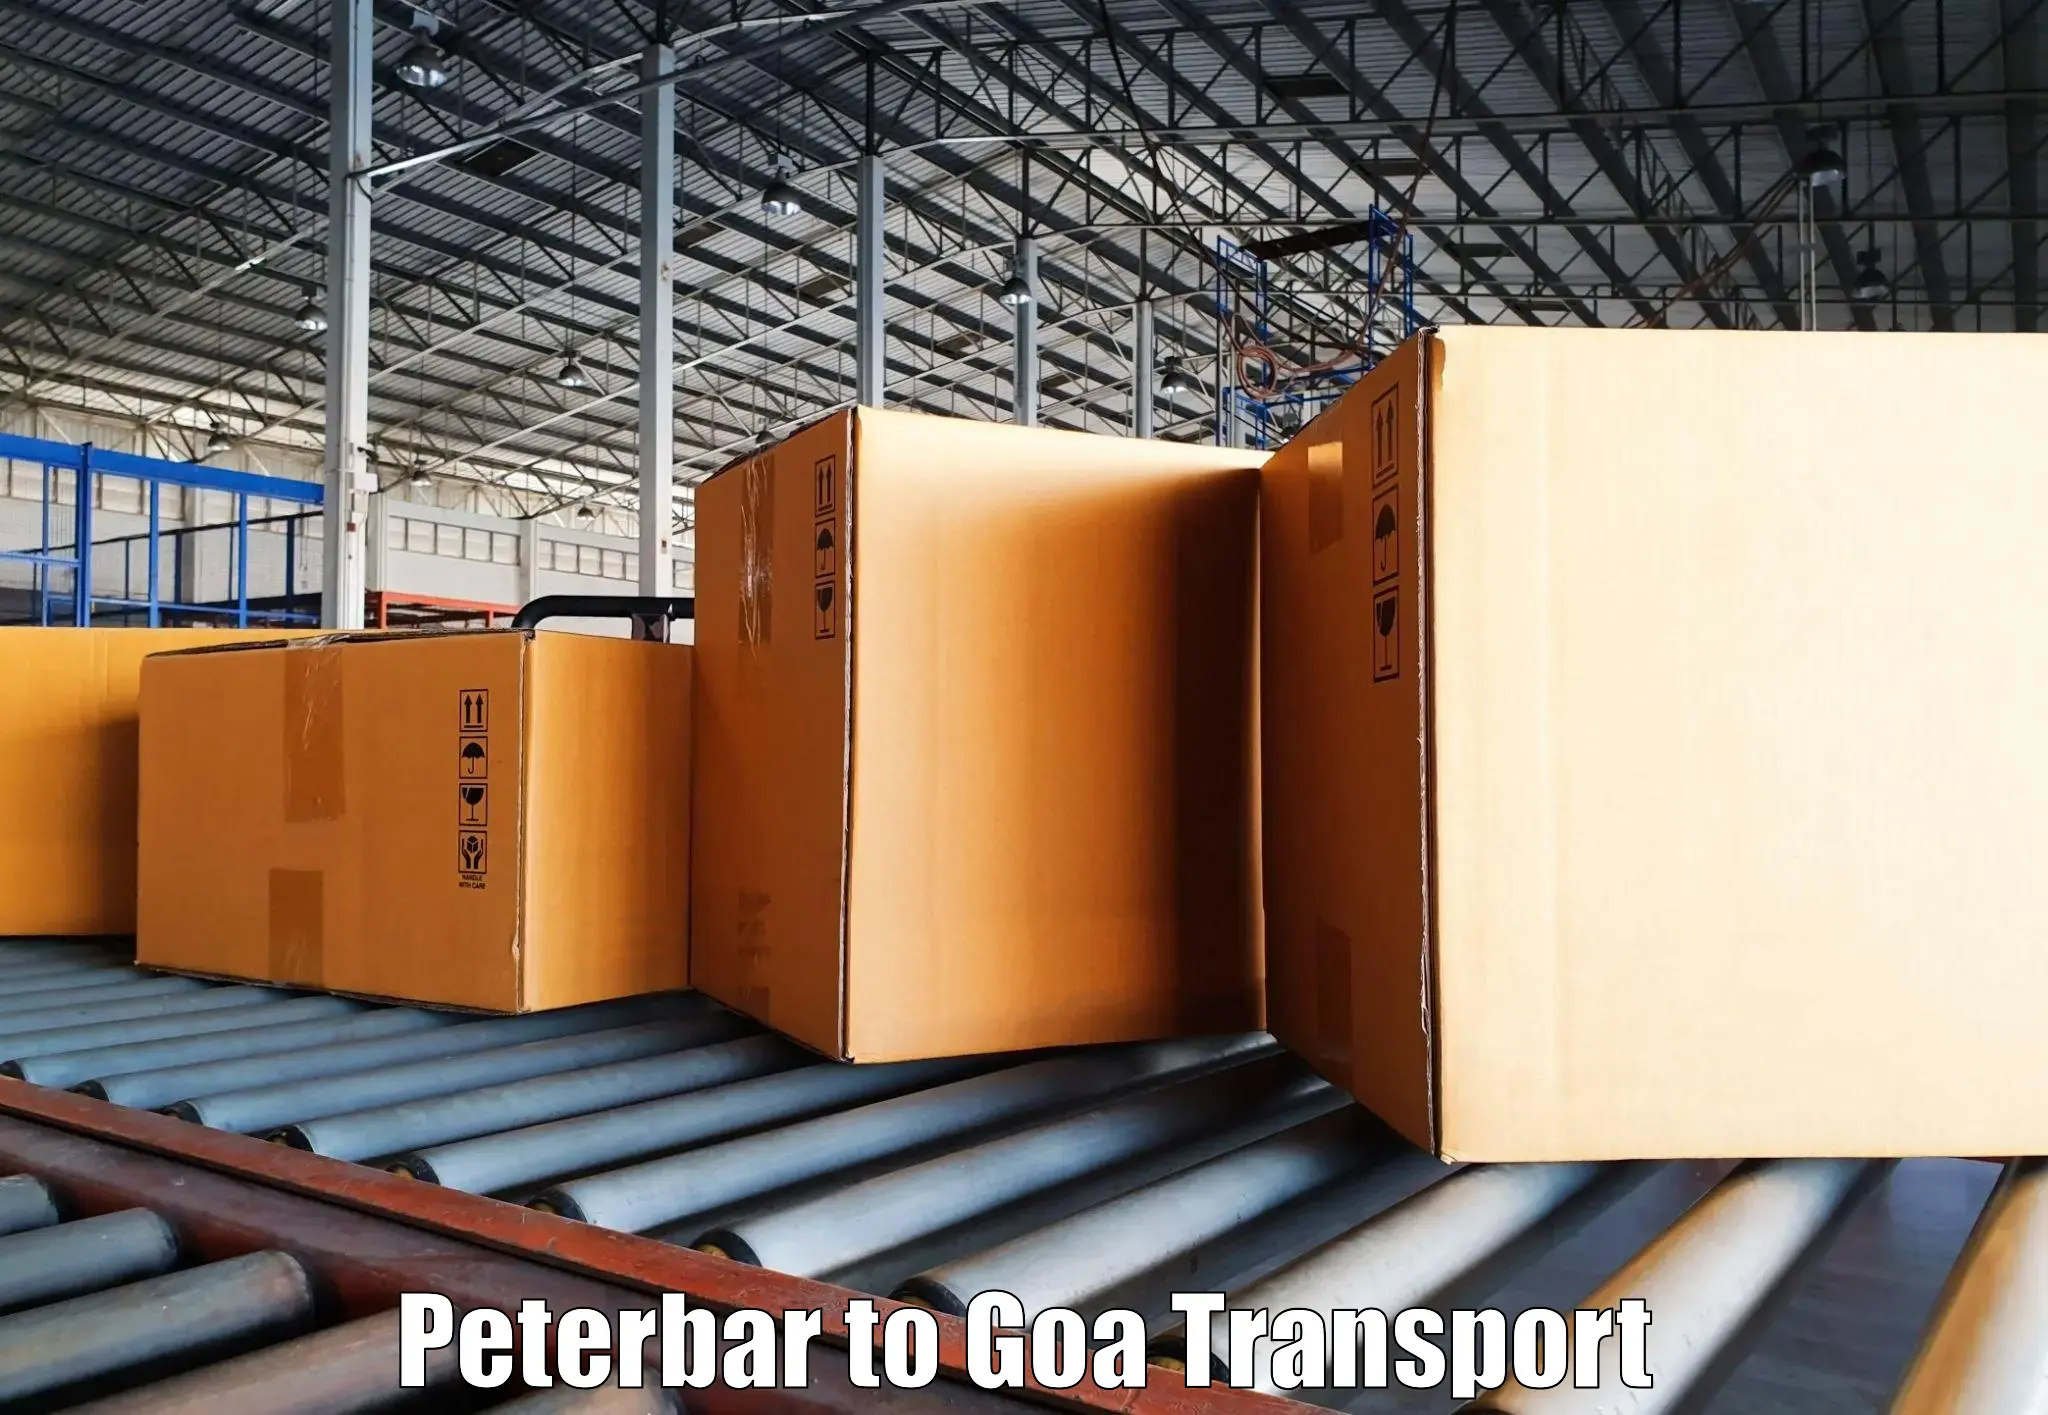 Transport bike from one state to another Peterbar to Goa